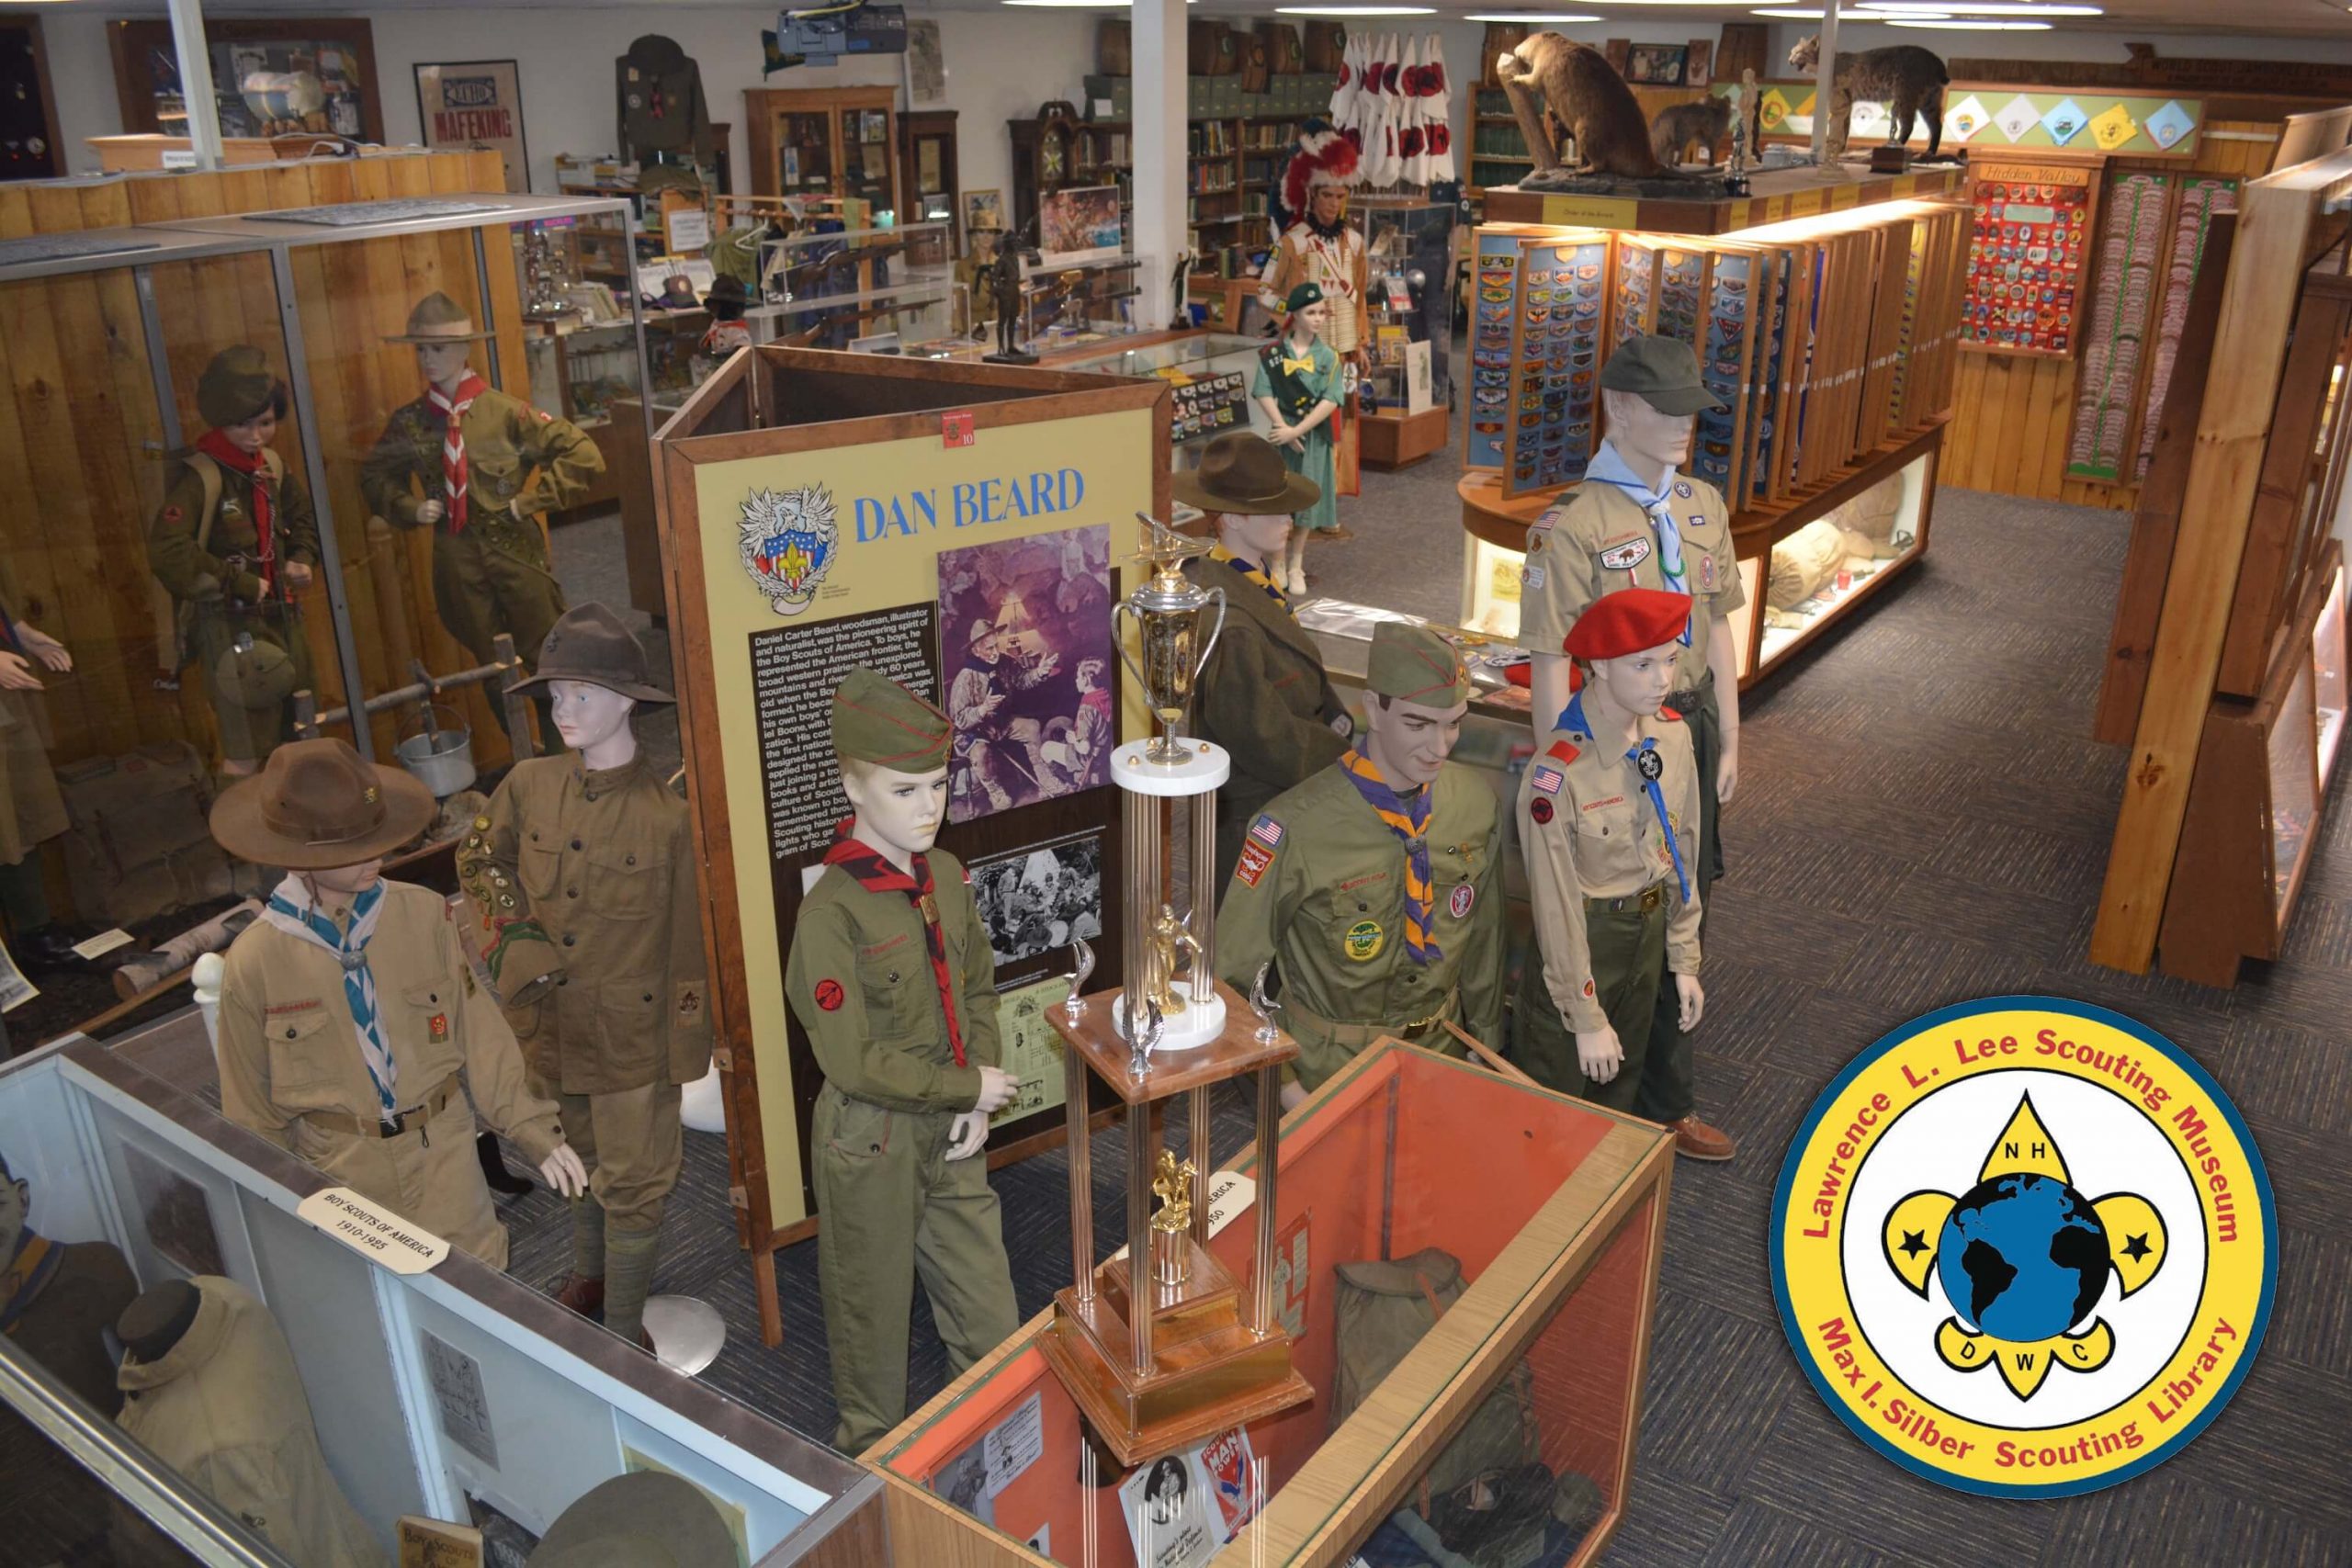 L. L. Lee Scouting Museum – History of Boy and Girl Scouting worldwide